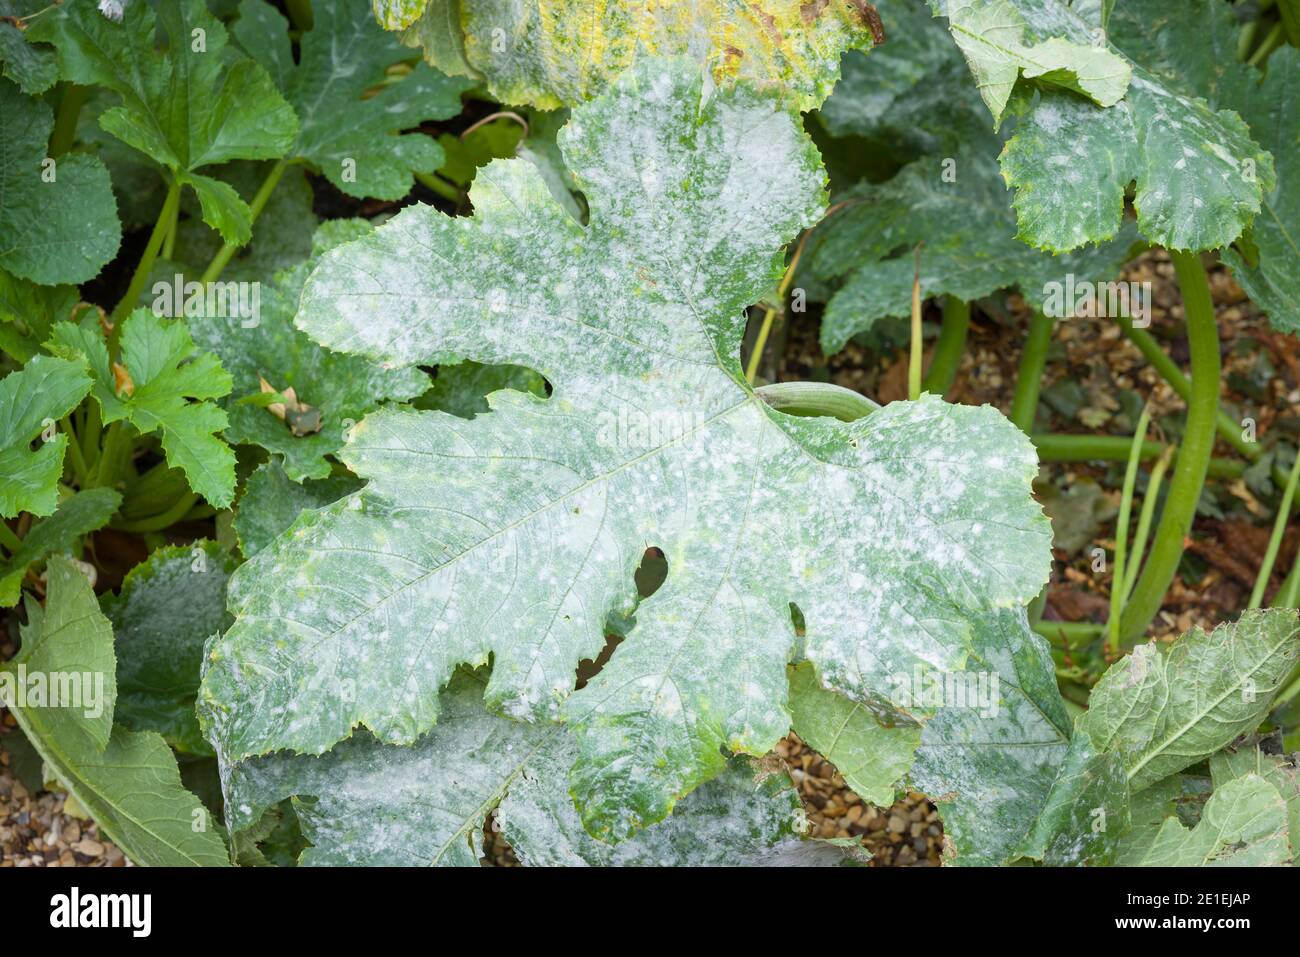 Powdery mildew growing on the leaves of a courgette (zucchini) plant in a UK garden Stock Photo